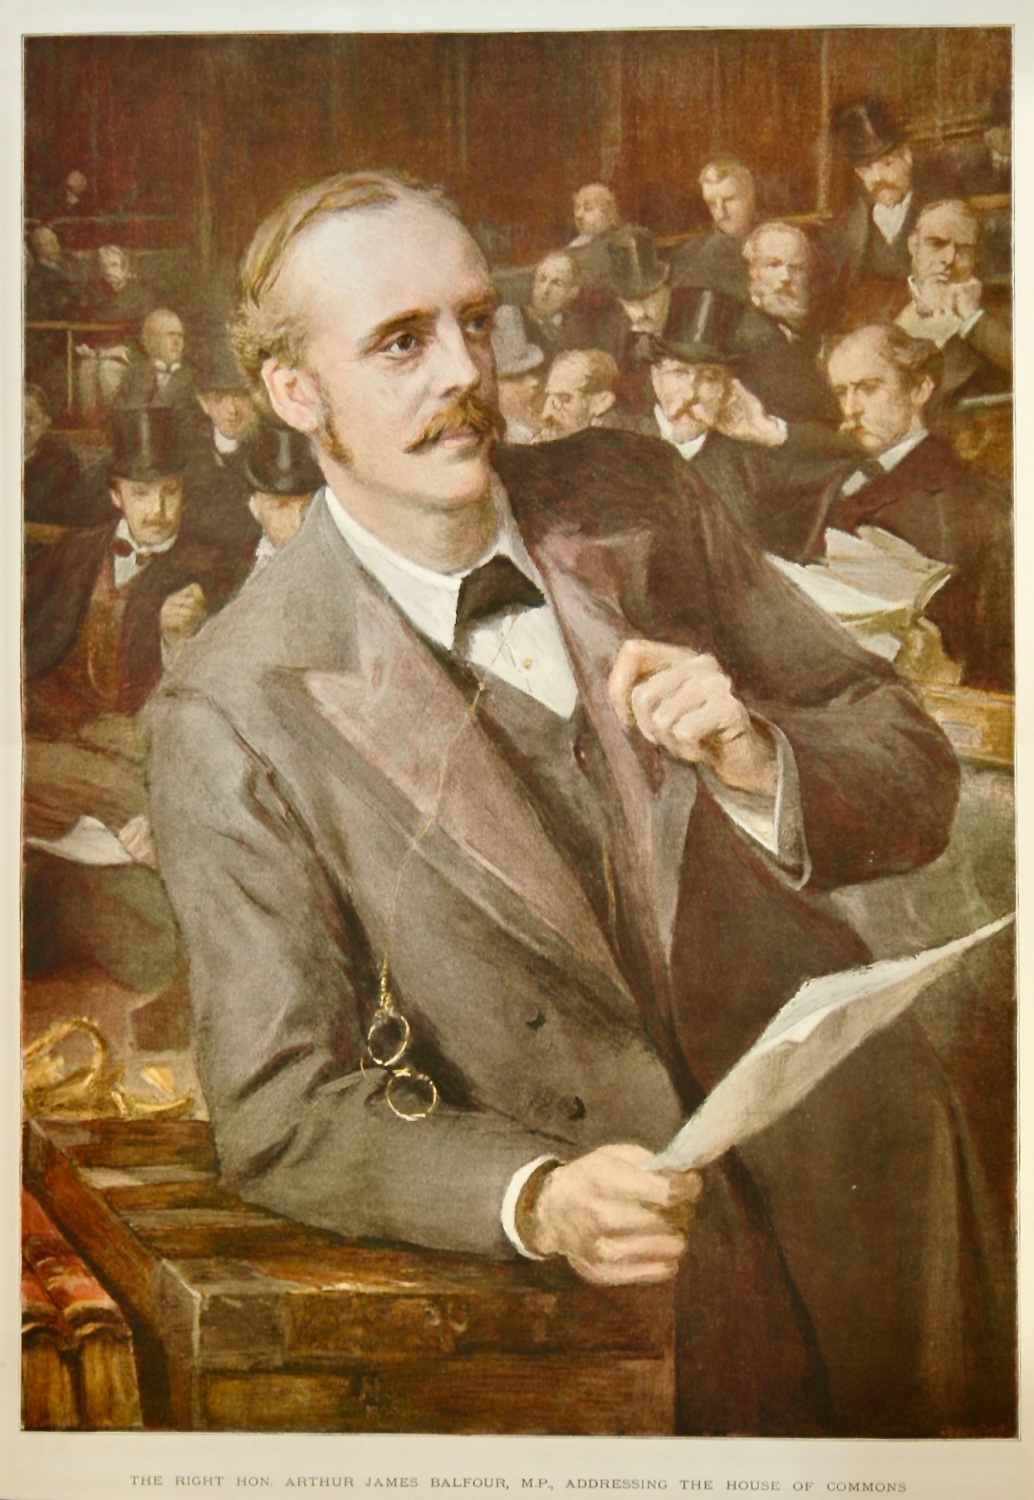 The Right Hon. Arthur James Balfour, M.P., Addressing the House of Commons.